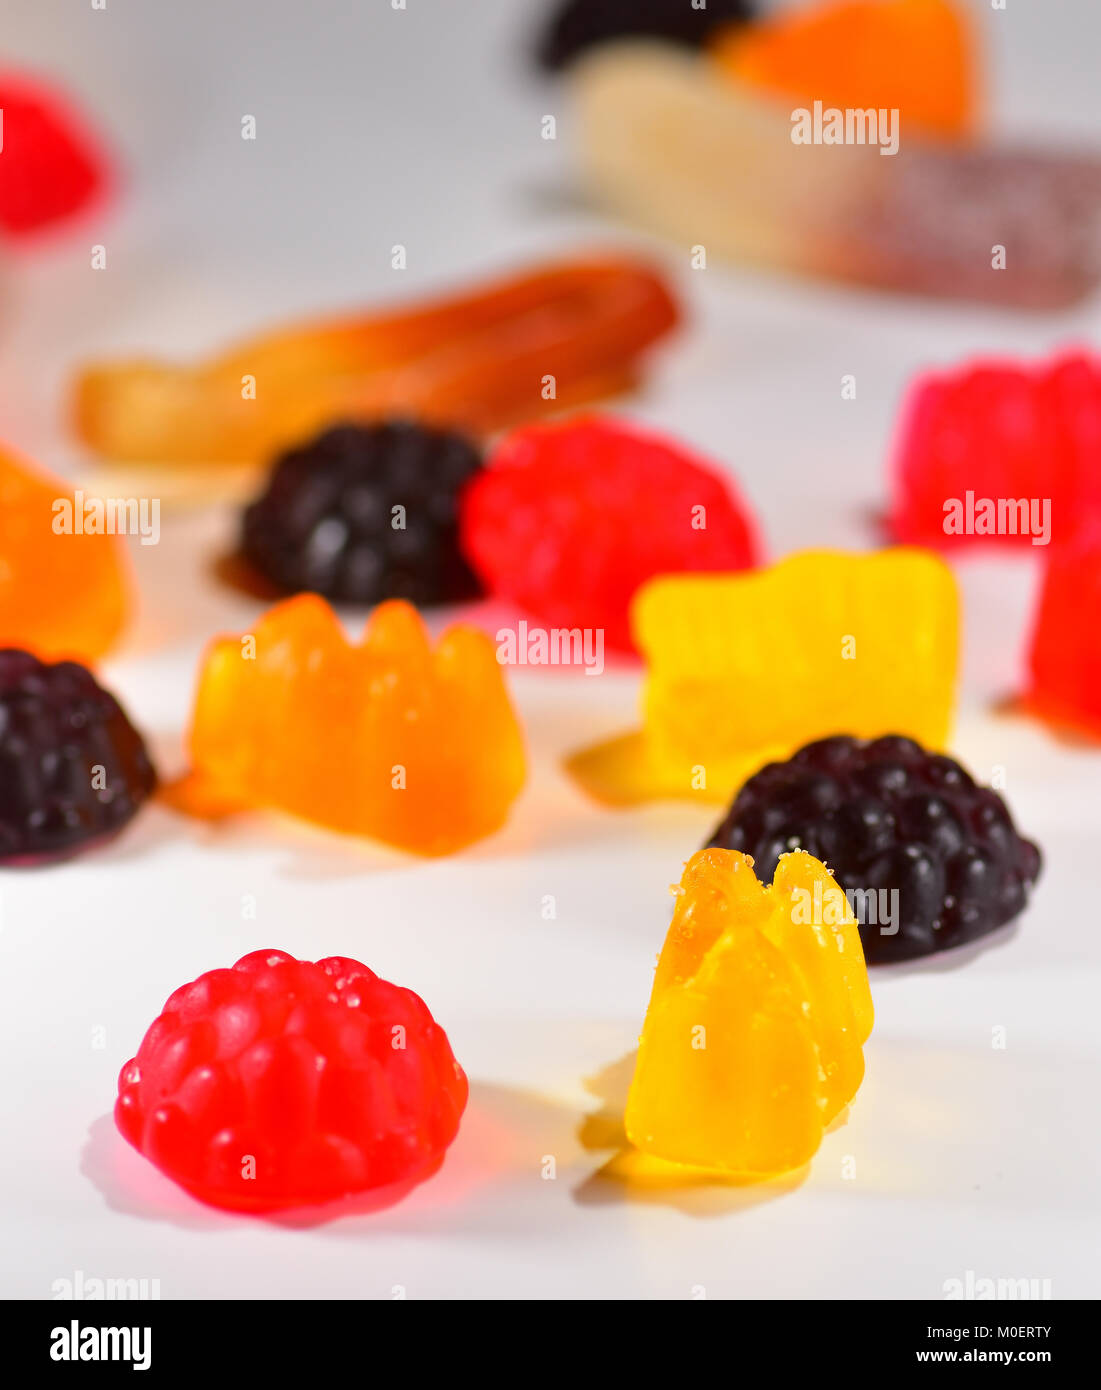 Pick and Mix sweets Stock Photo